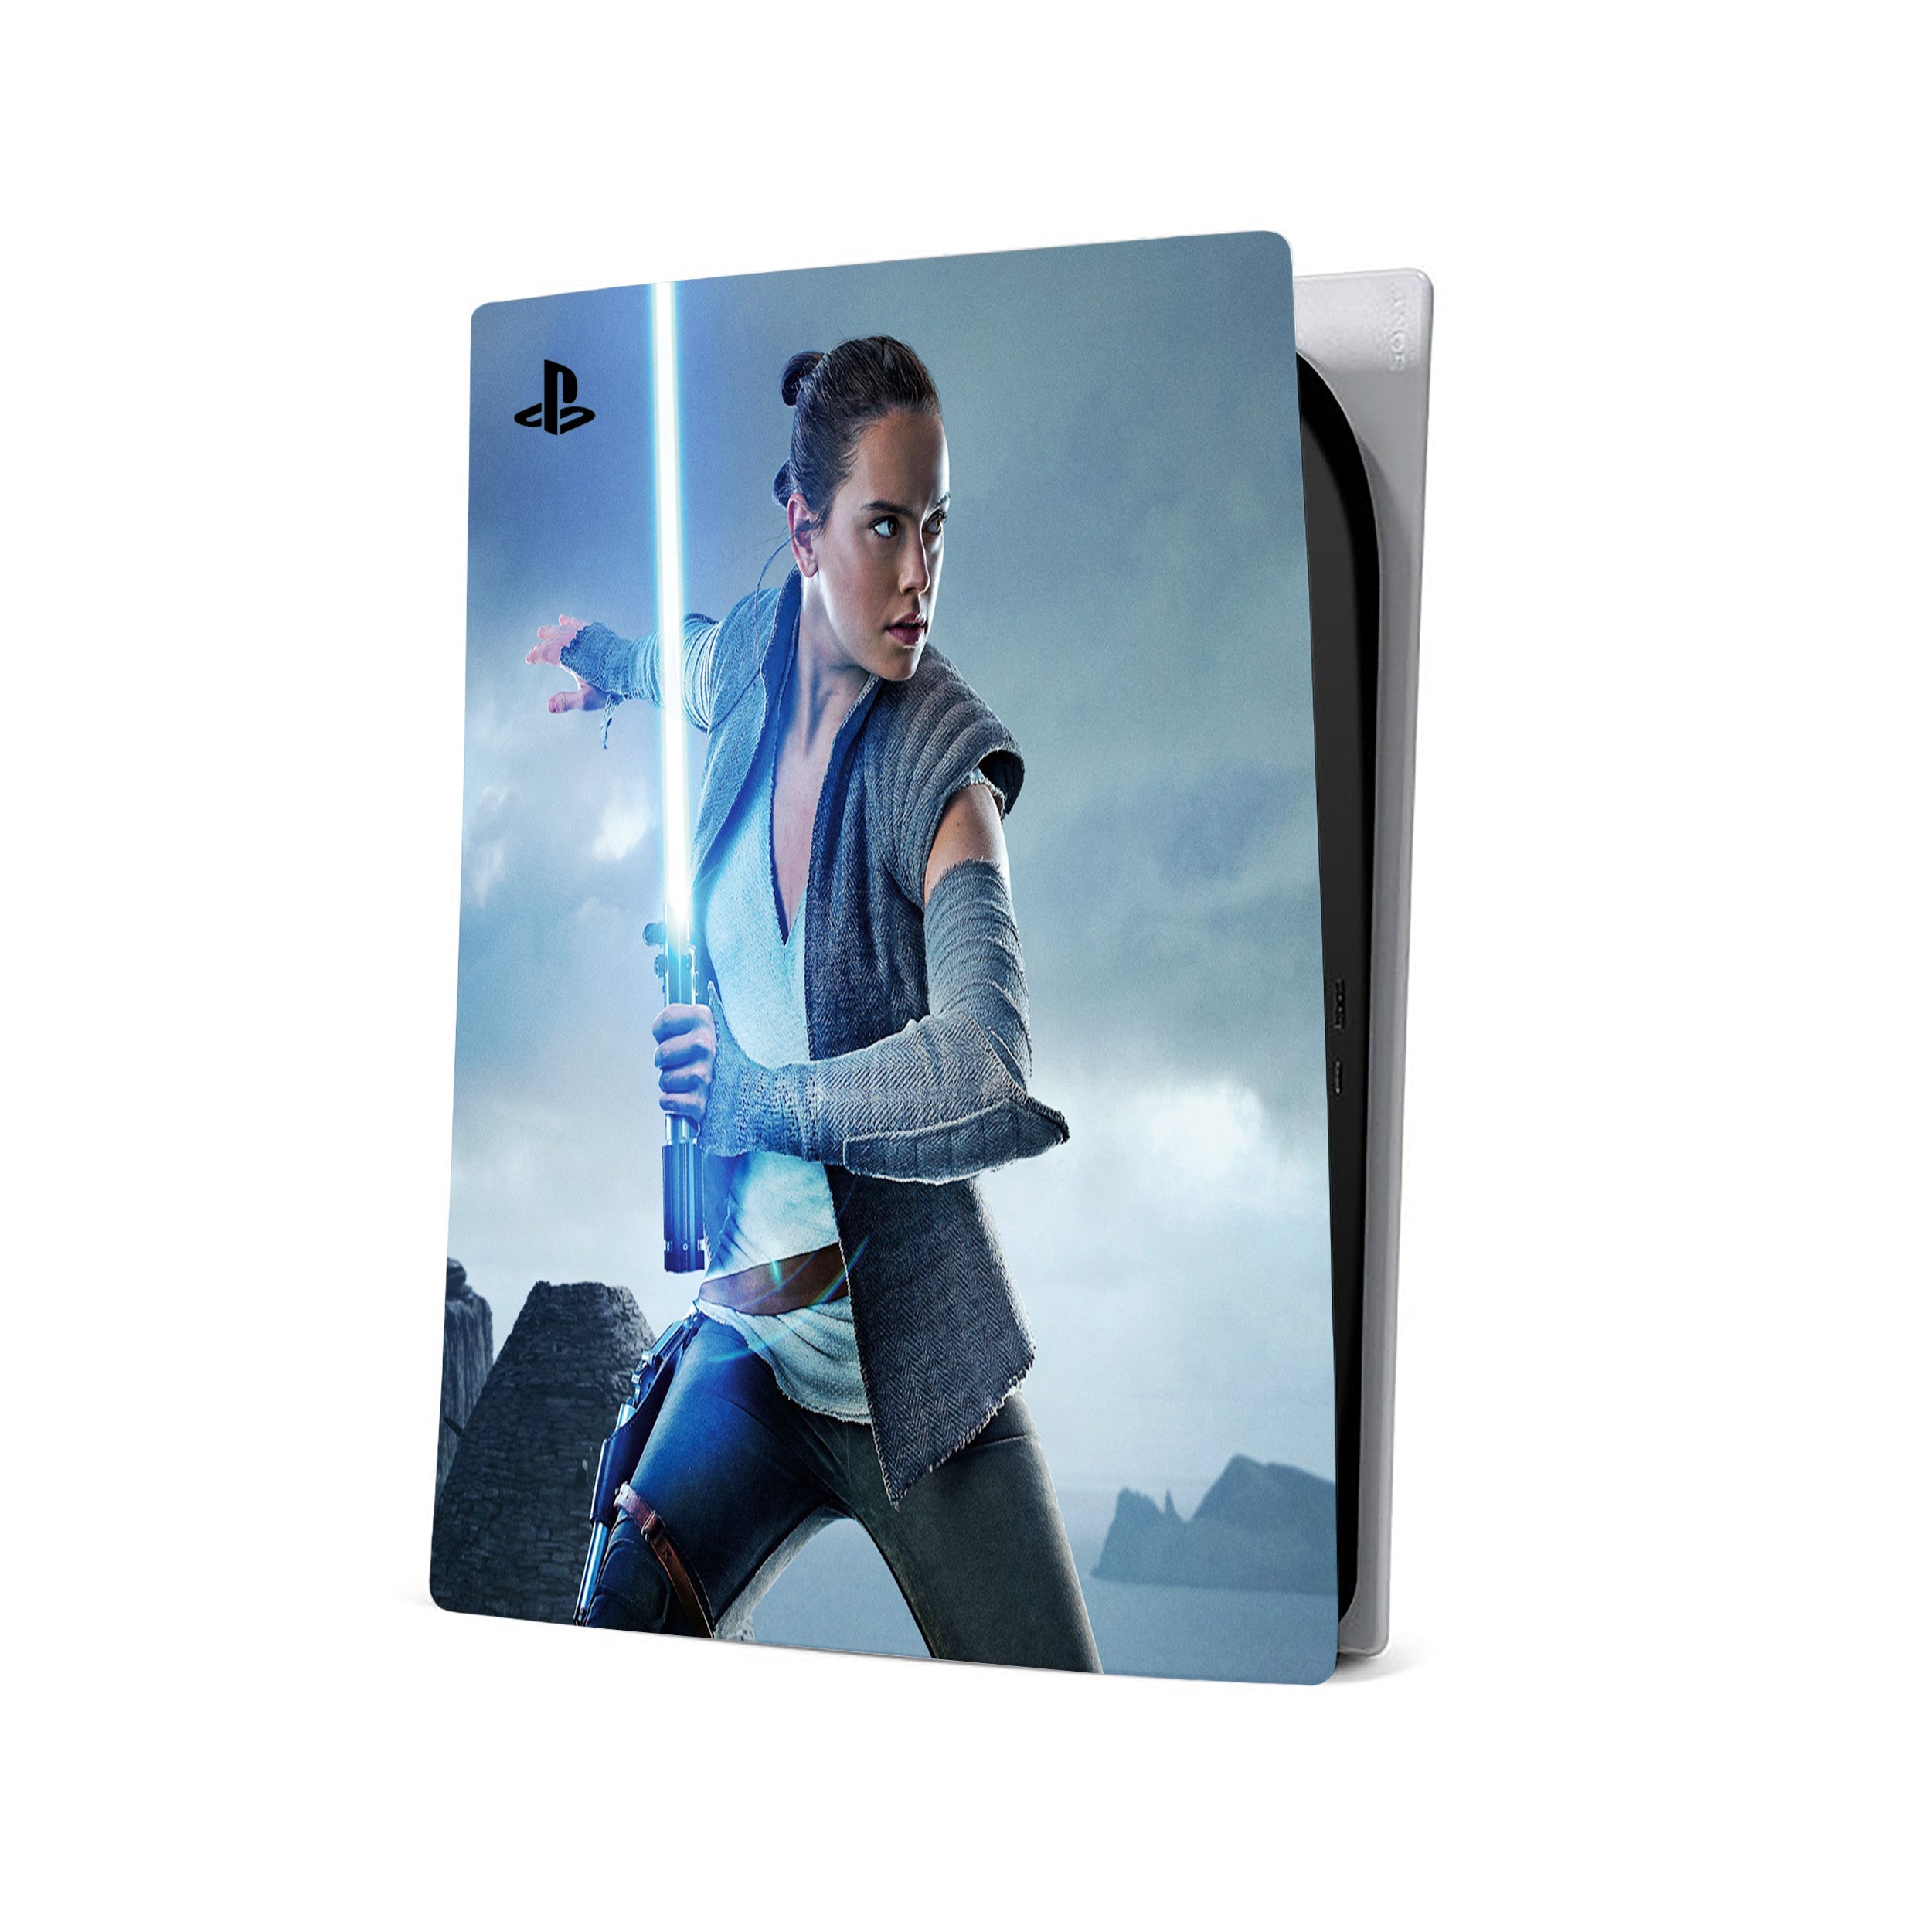 A video game skin featuring a Star Wars Rey design for the PS5.